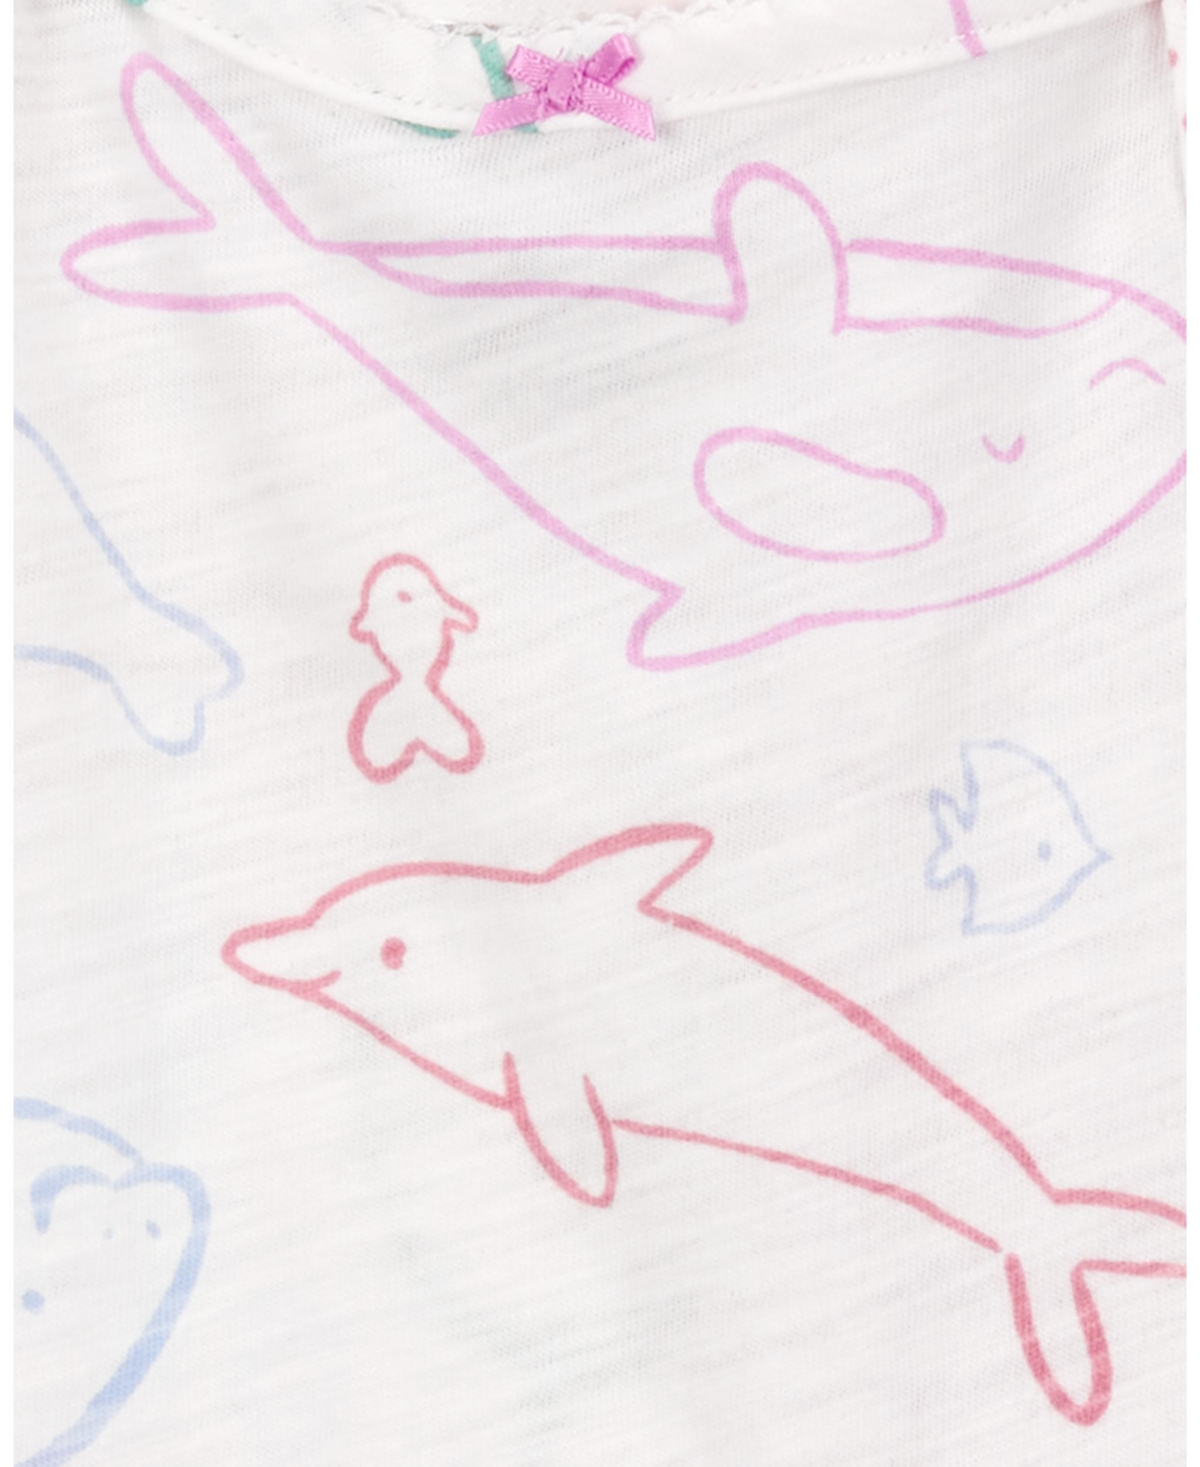 Shop Carter's Baby 3 Piece Whale Little Character Set In Pink